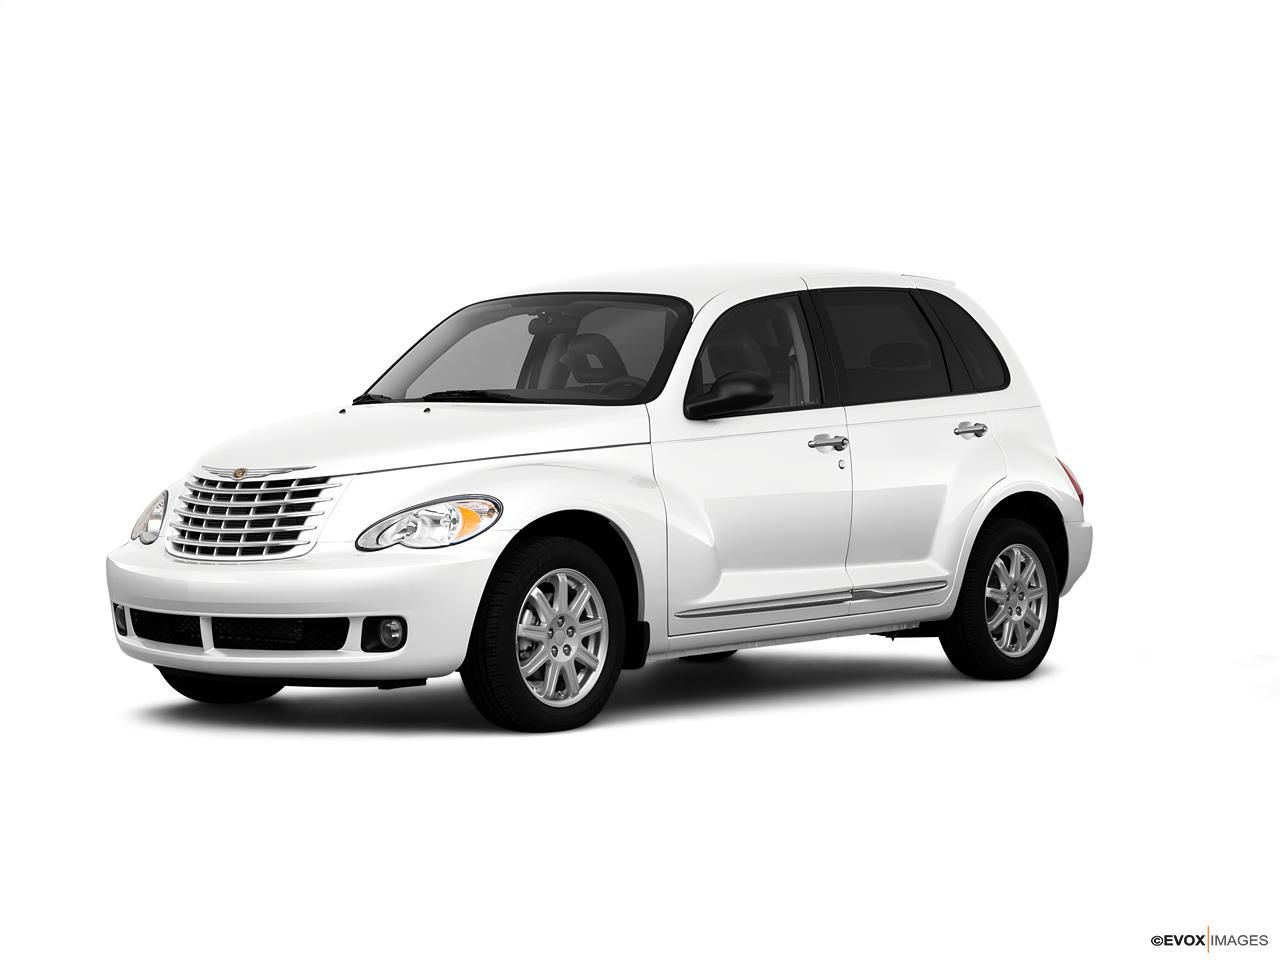 2010 Chrysler PT Cruiser Research, Photos, Specs and Expertise | CarMax